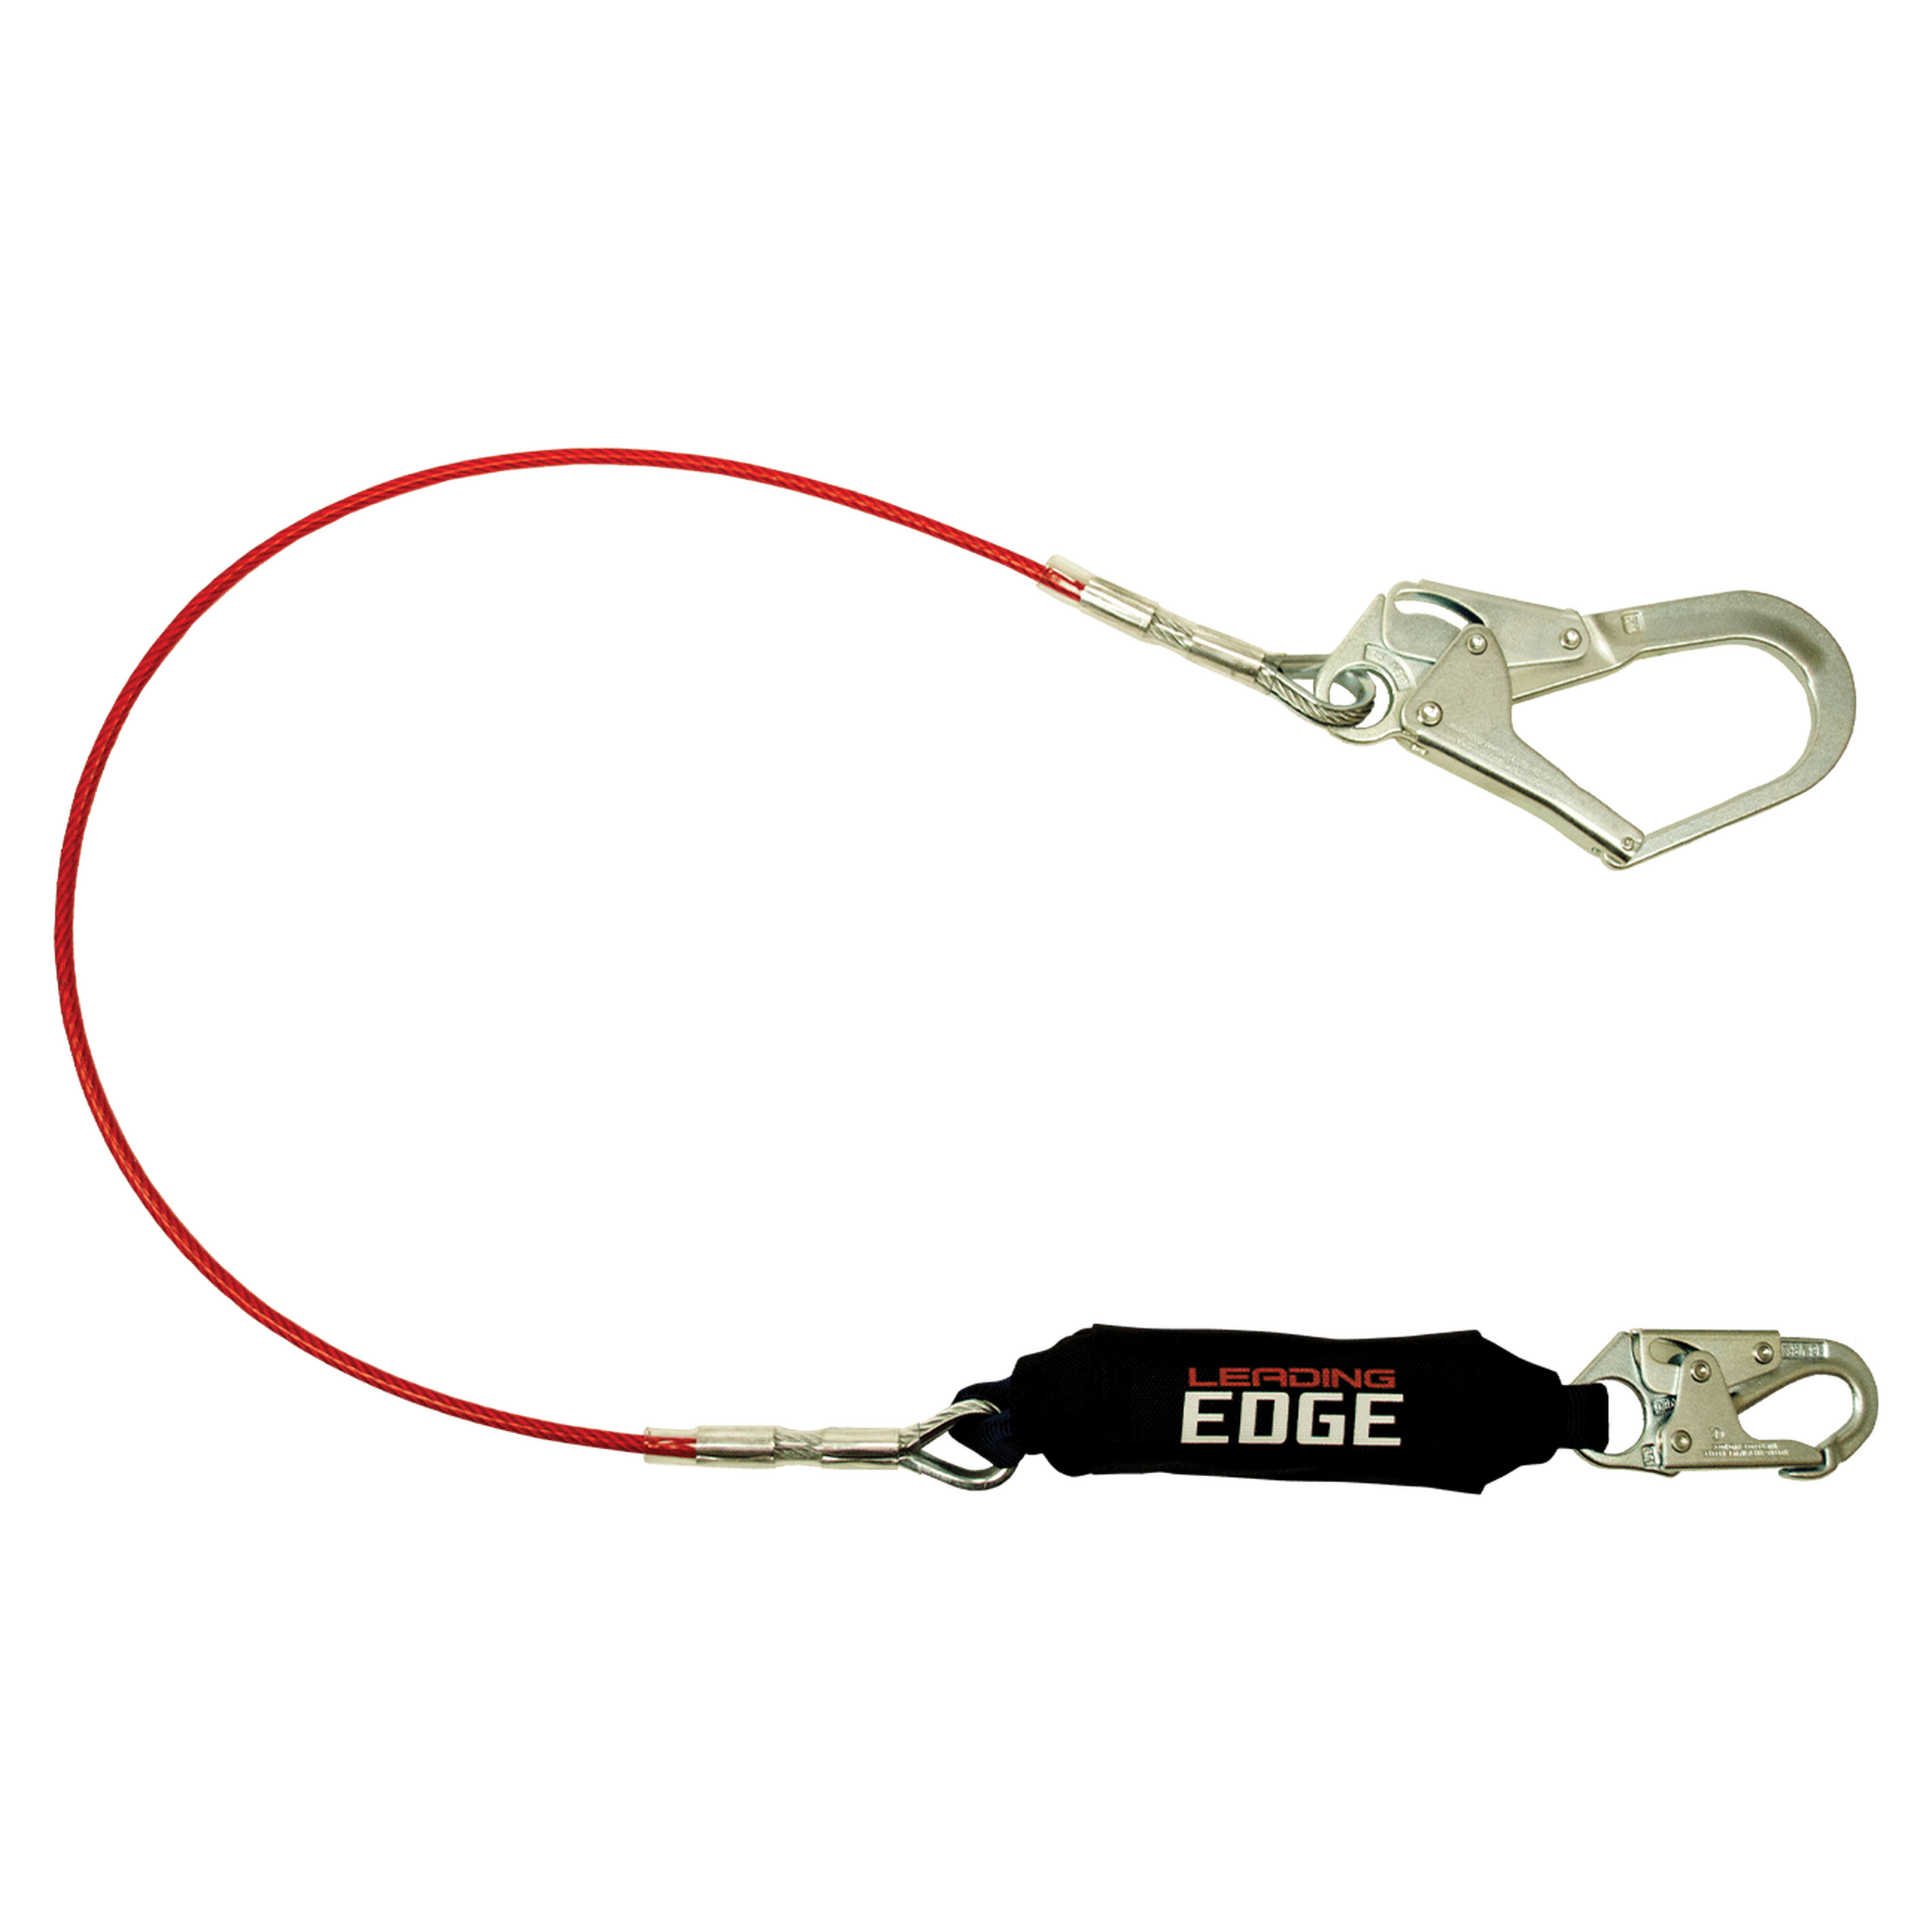 FallTech 8354LE3 6' Leading Edge Cable Energy Absorbing Lanyard, Single-leg with Steel Connectors (each)